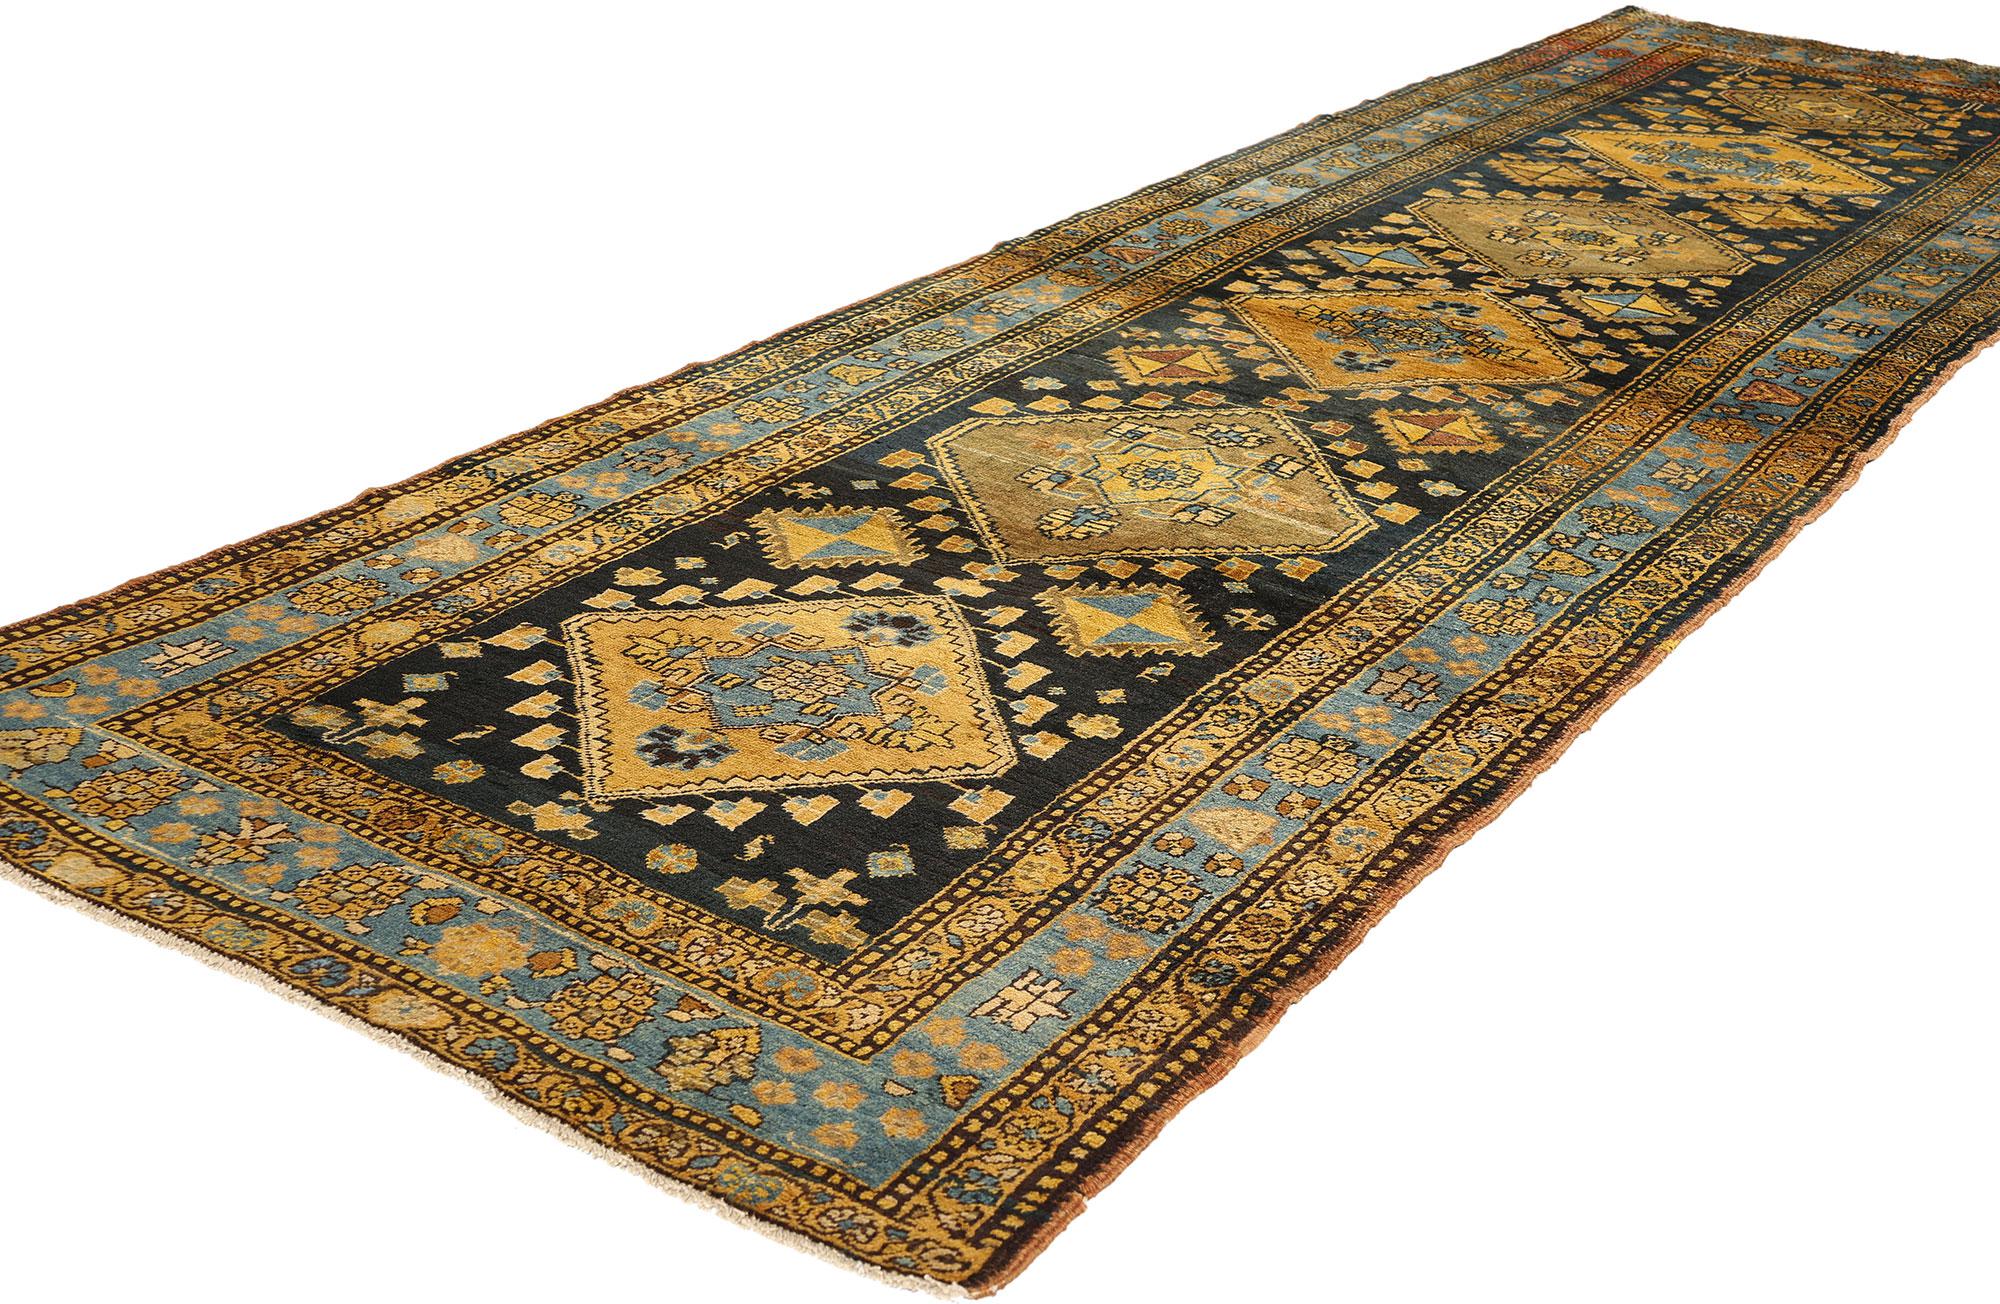 20th Century Antique Persian Sarab Rug Runner, 03'05 x 11'06 For Sale